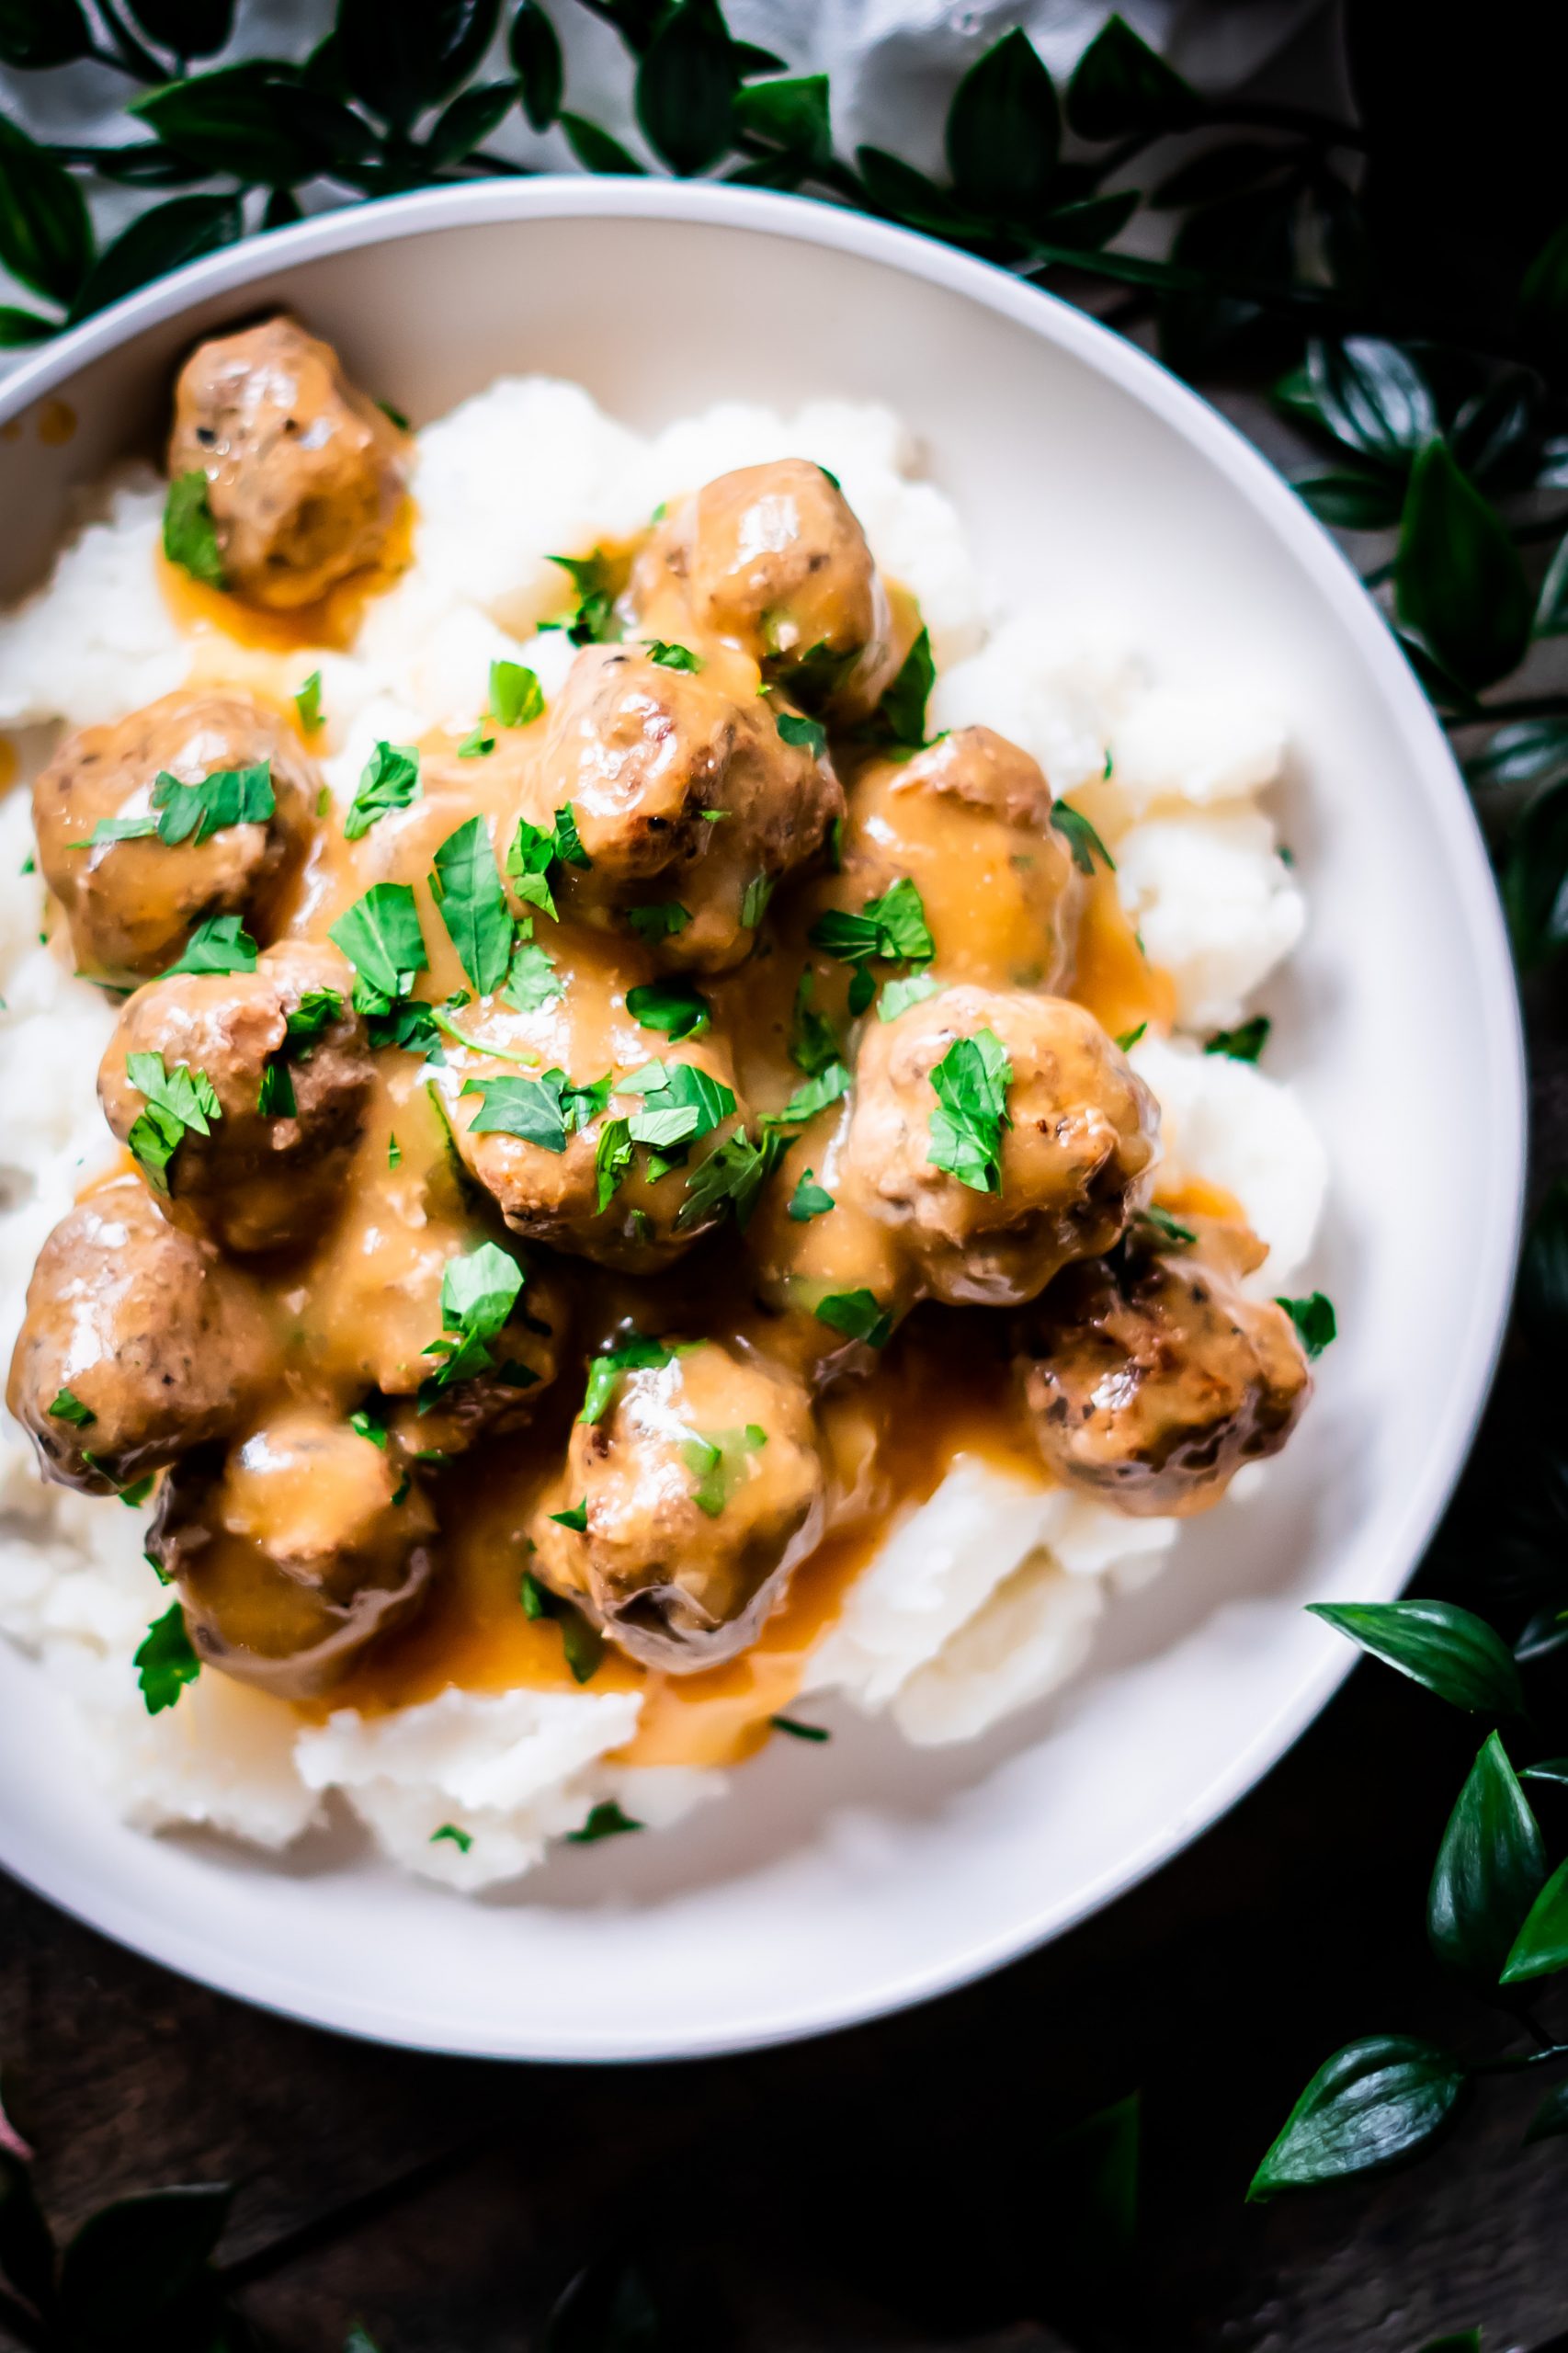 Overhead view of dairy free swedish meatballs smothered in gravy on mashed potatoes